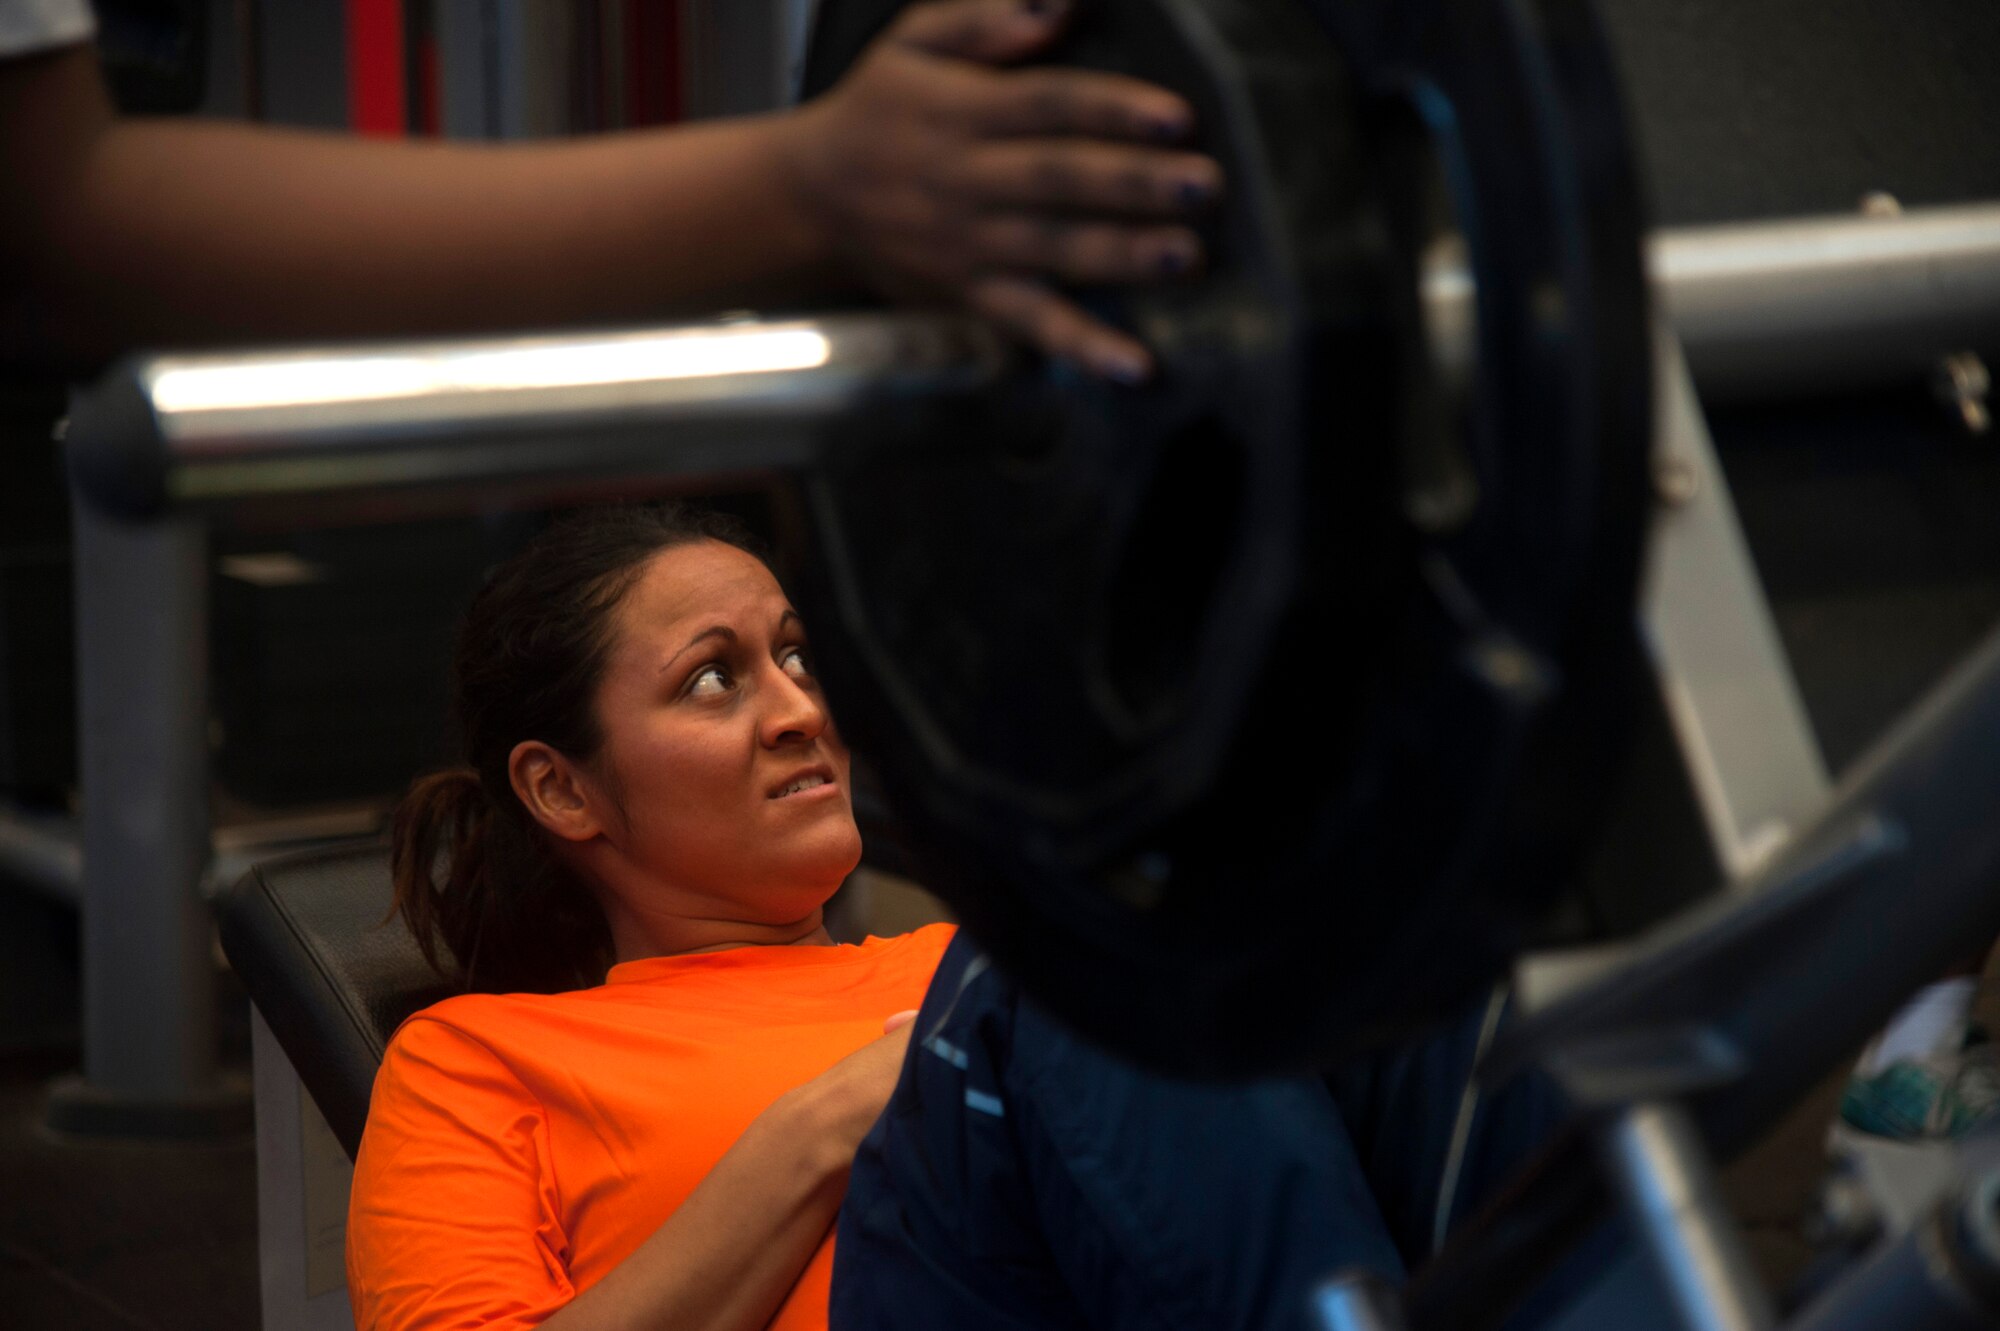 A member of Team MacDill leg presses during the 4th annual 5k and weight lifting competition to honor Maj. Raymond Estelle at MacDill Air Force Base, Fla., Jan. 13, 2017. The weight-lifting competition consisted of a bench press and leg press category. (U.S. Air Force photo by Airman 1st Class Rito Smith) 